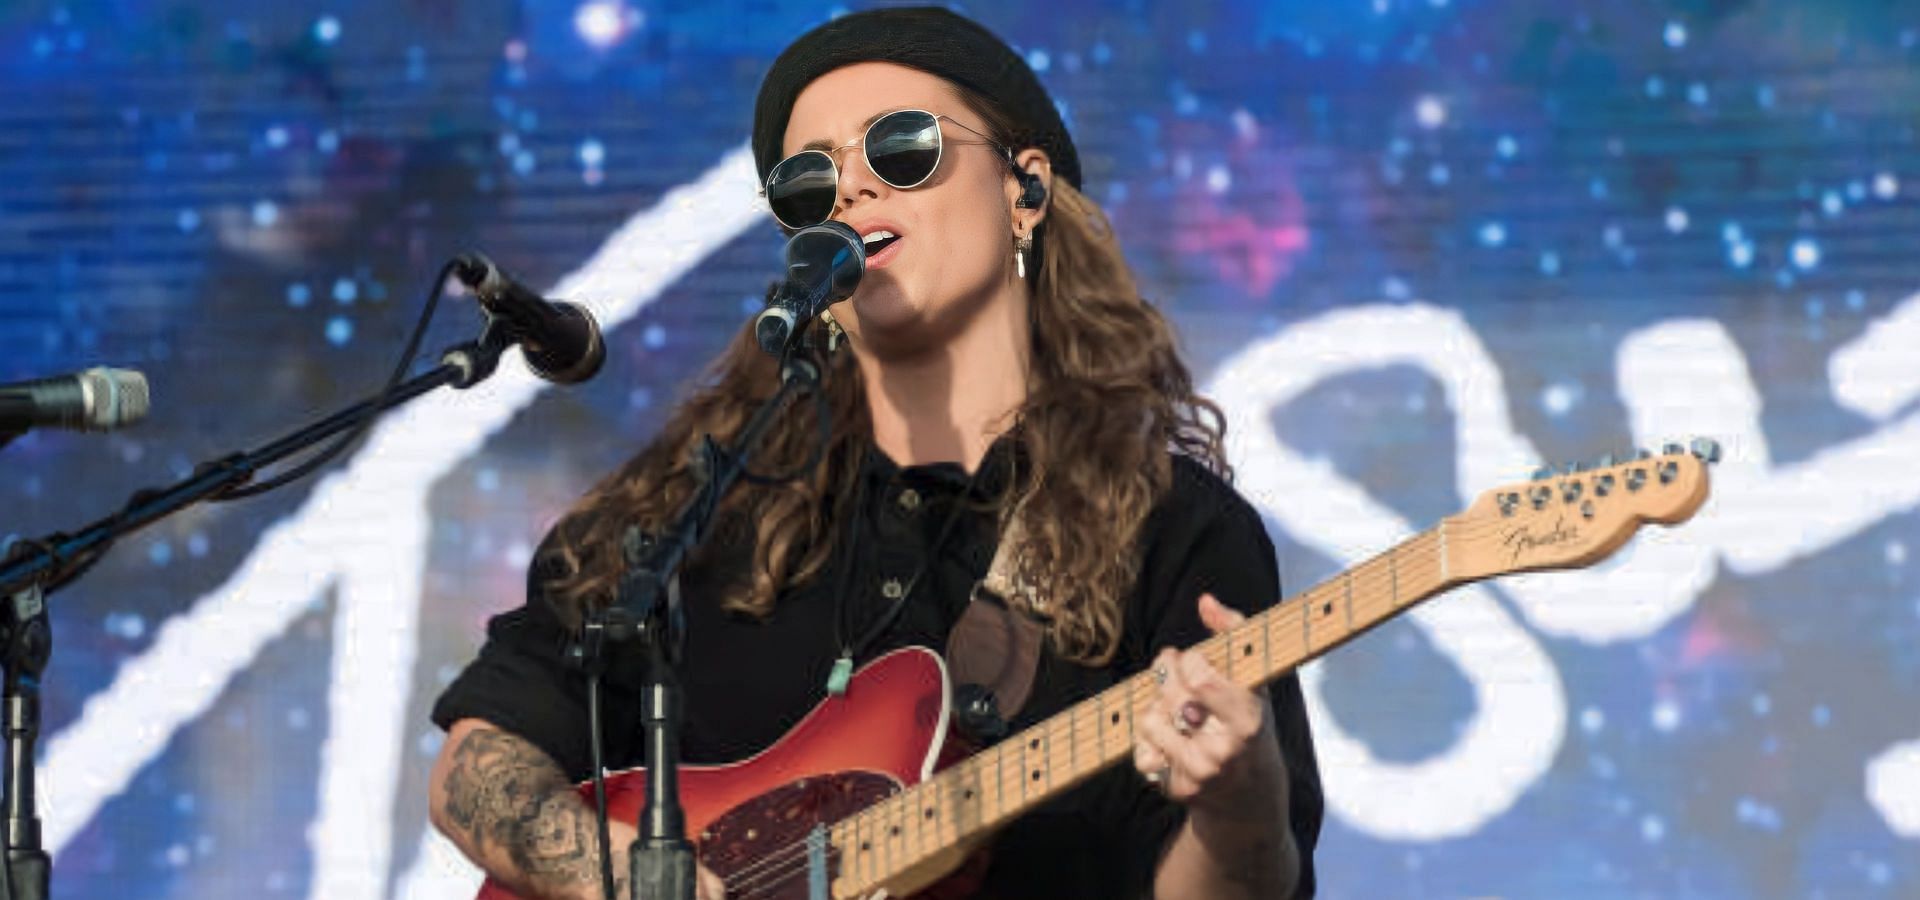 Tash Sultana Tour 2023 Tickets, dates, venues and more